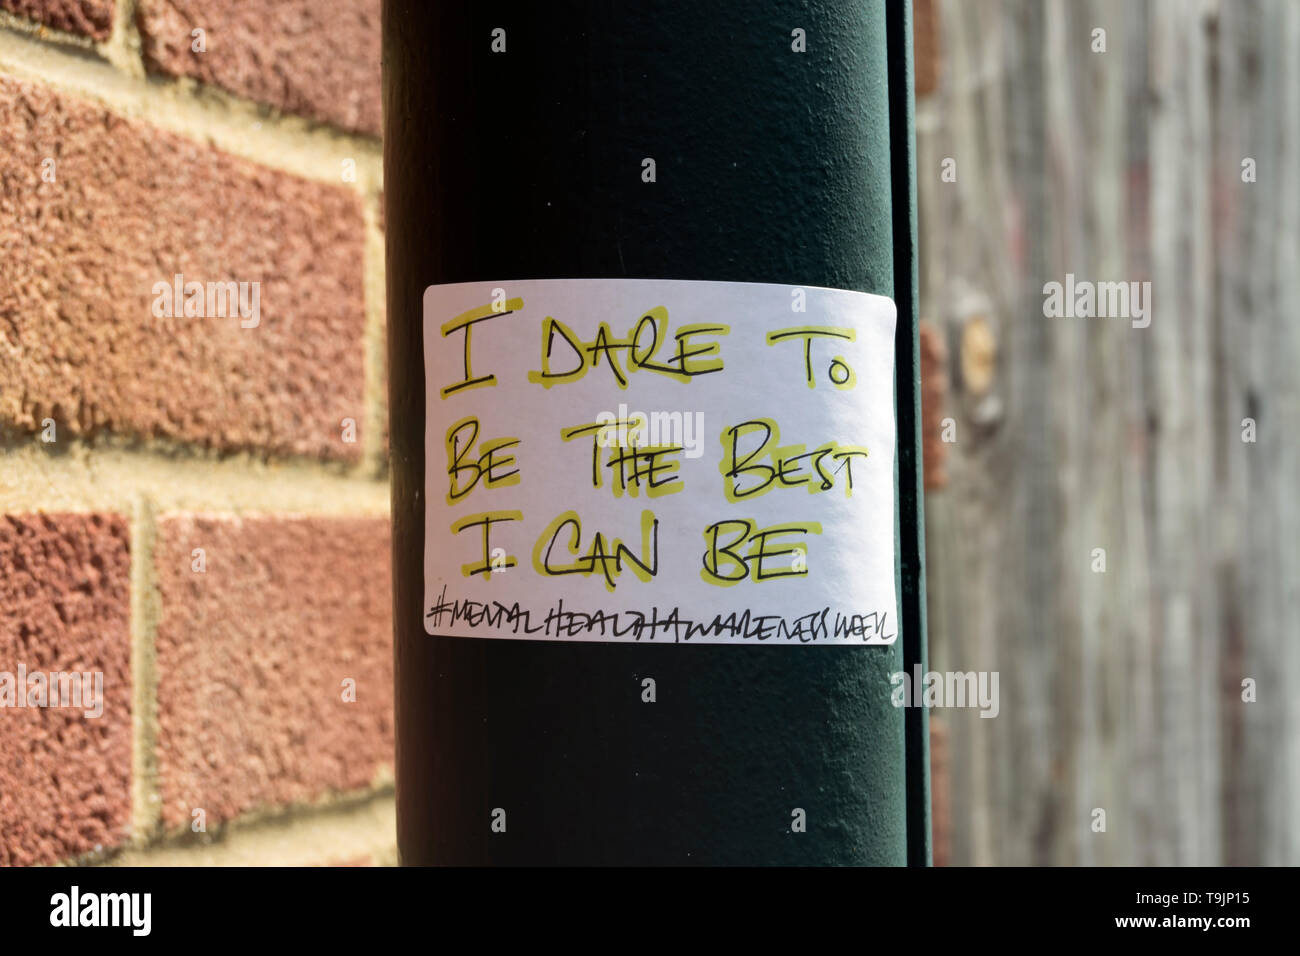 i dare to be the best i can be, a sticker attached to a lamppost in barnes, london, england, with a mental health awareness week hashtag Stock Photo